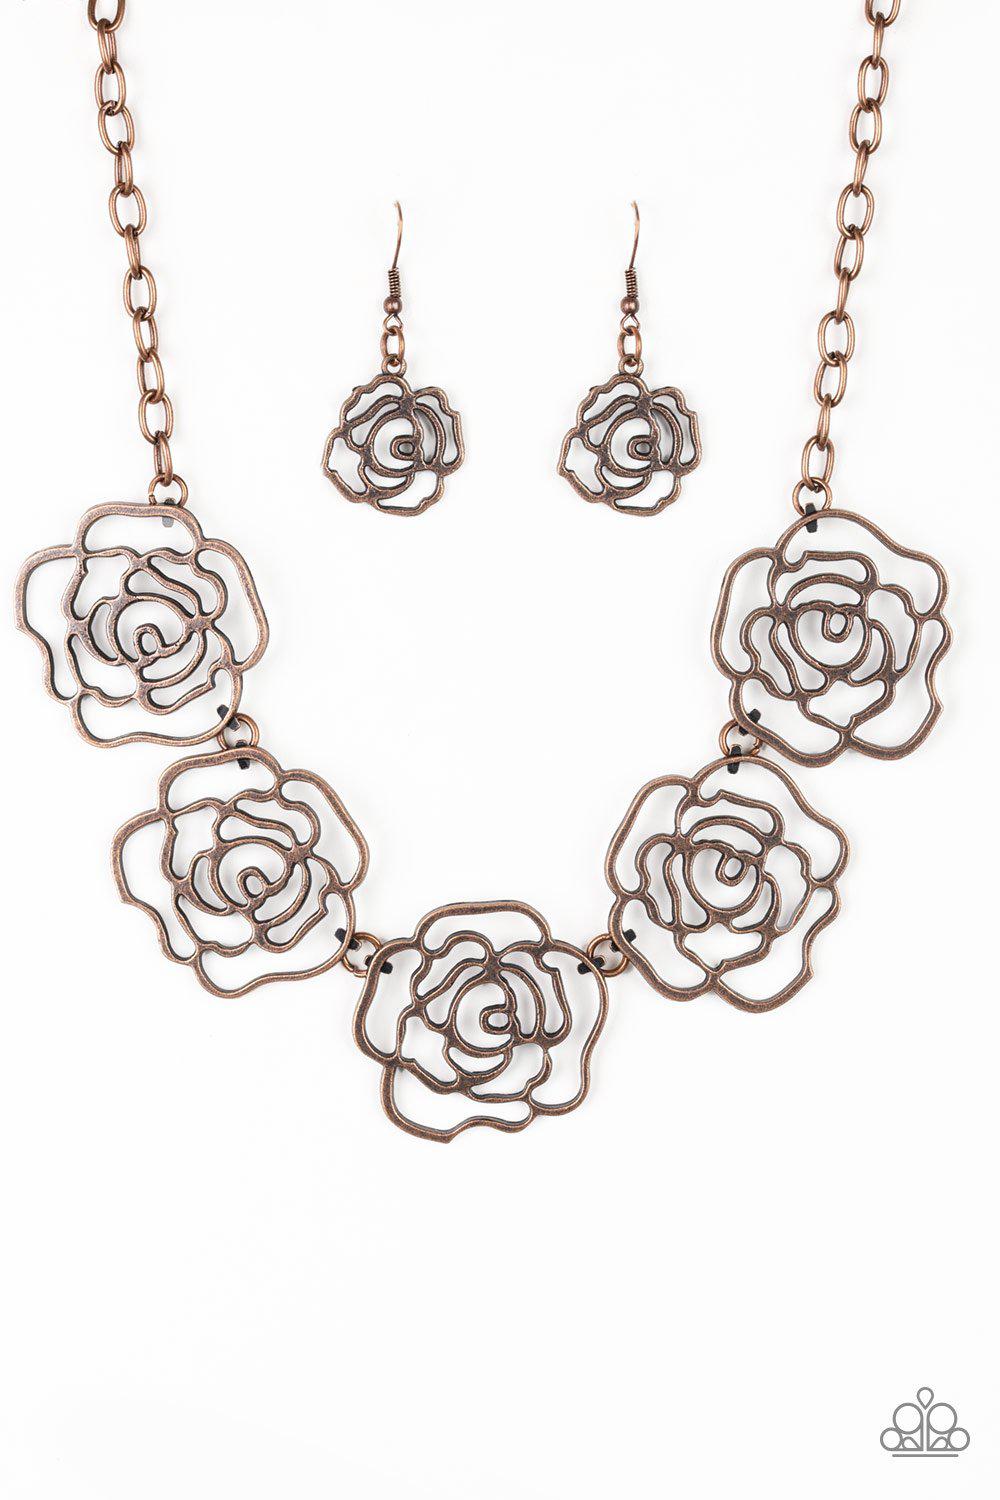 Budding Beauty Copper Flower Necklace - Paparazzi Accessories - lightbox -CarasShop.com - $5 Jewelry by Cara Jewels